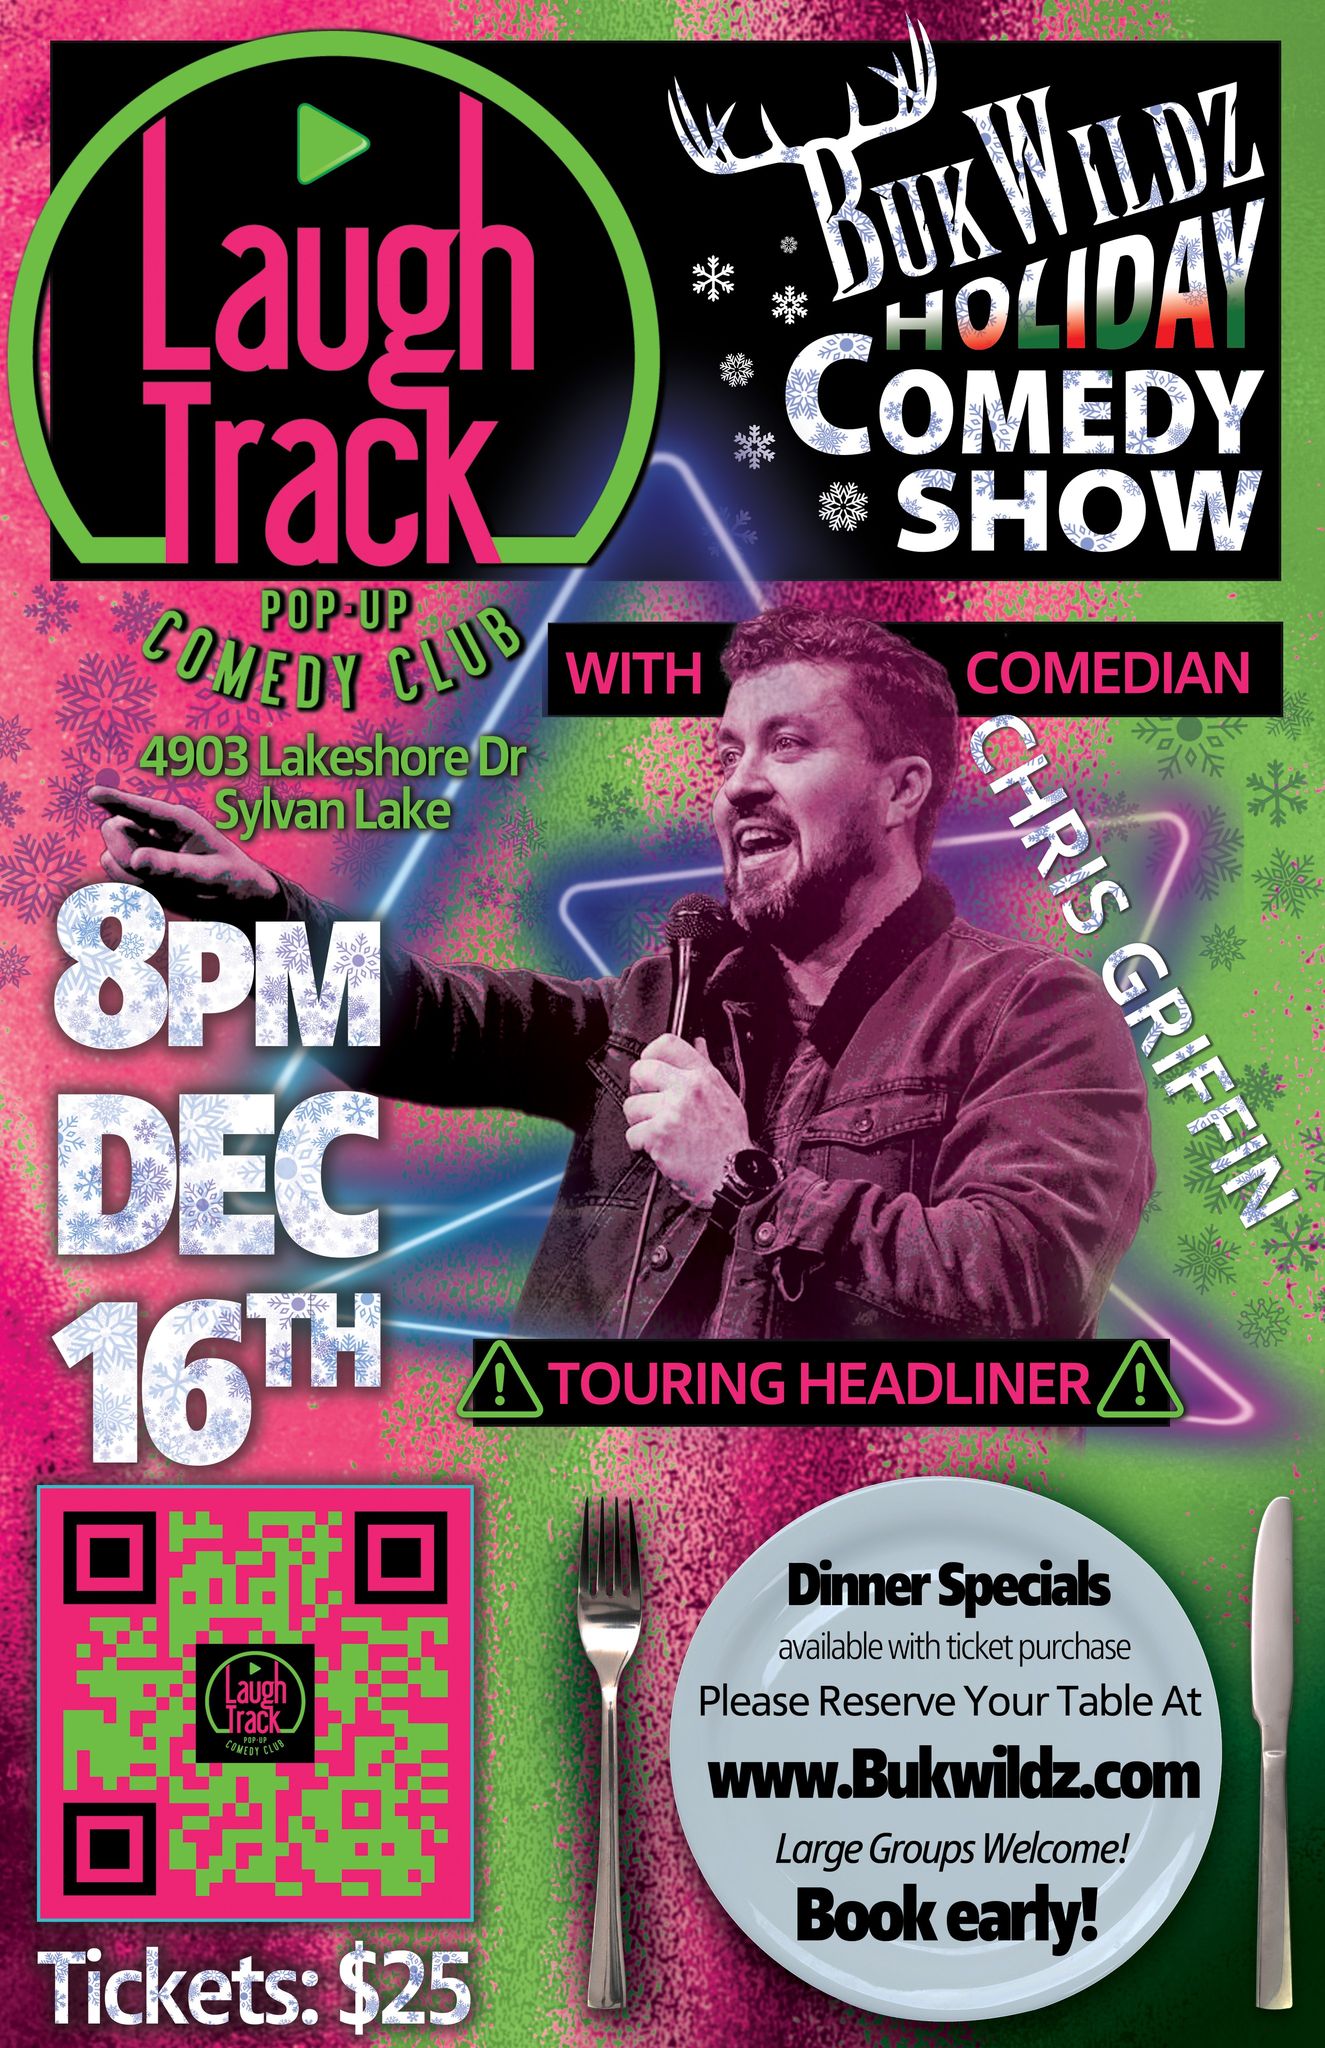 Laugh Track Presents Buk Wildz Holiday Comedy Show with Headliner Chris Griffin